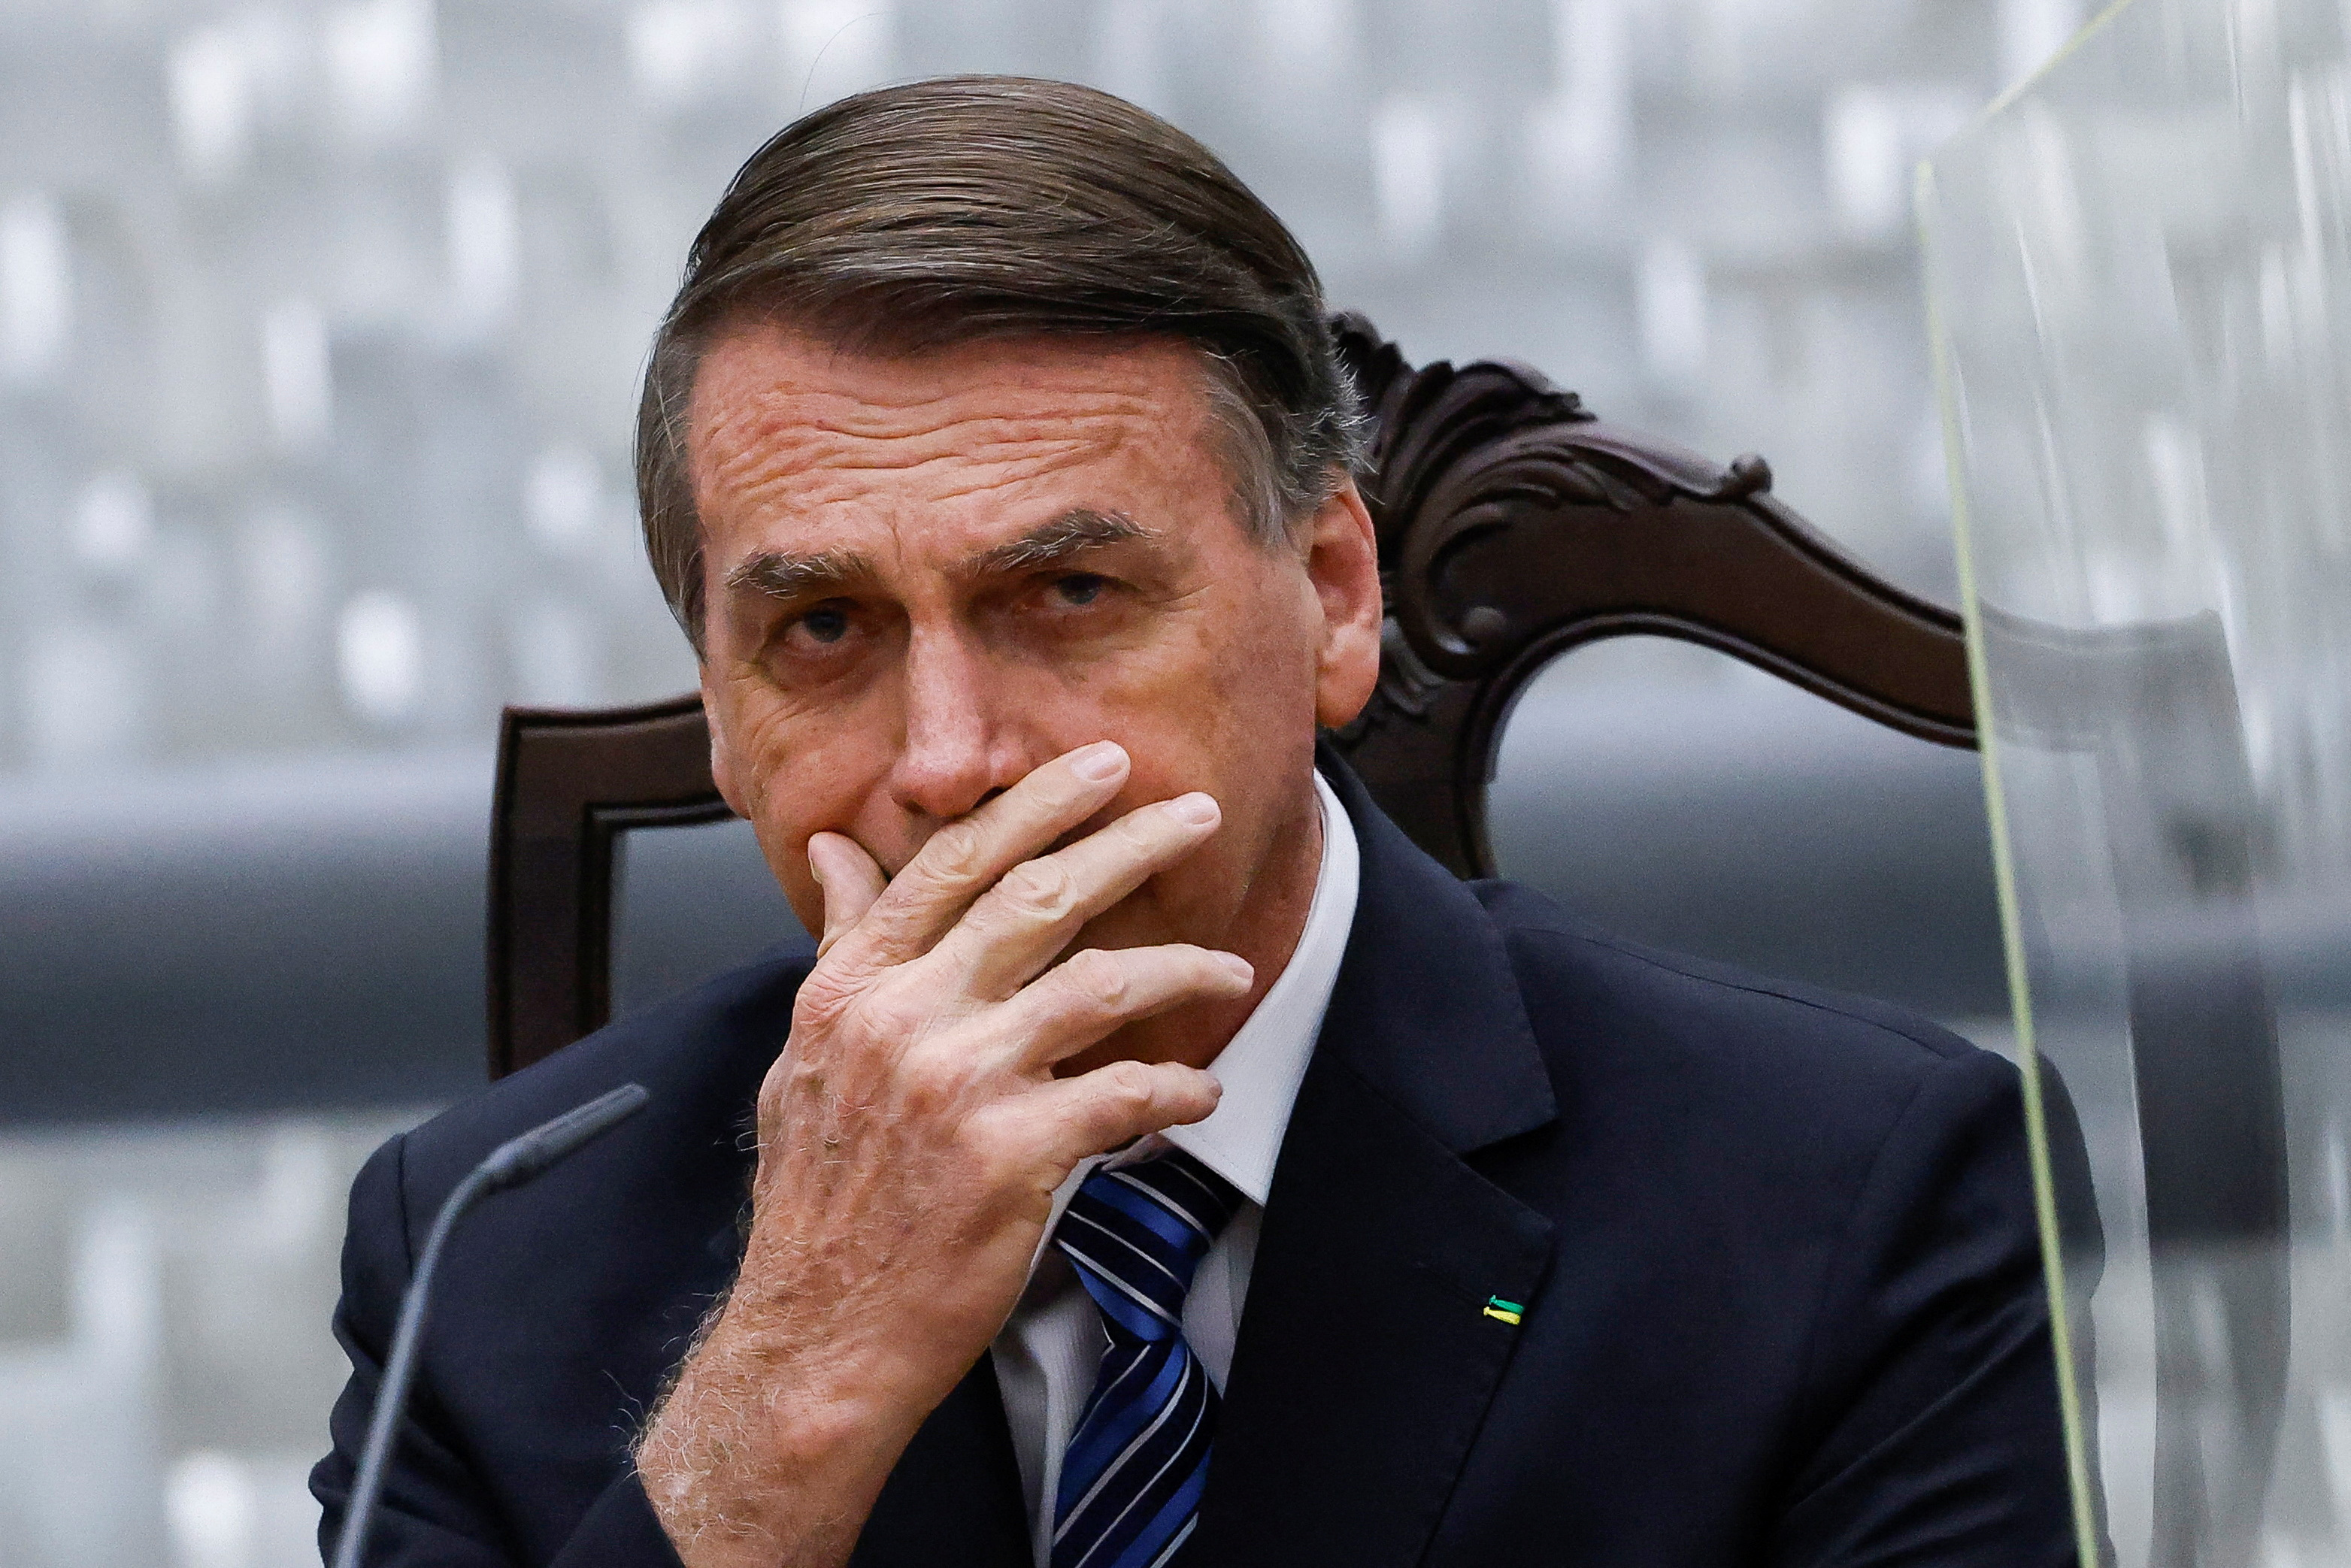 Brazil's President Jair Bolsonaro attends an inauguration ceremony for new judges of Brazil's Superior Court of Justice in Brasilia